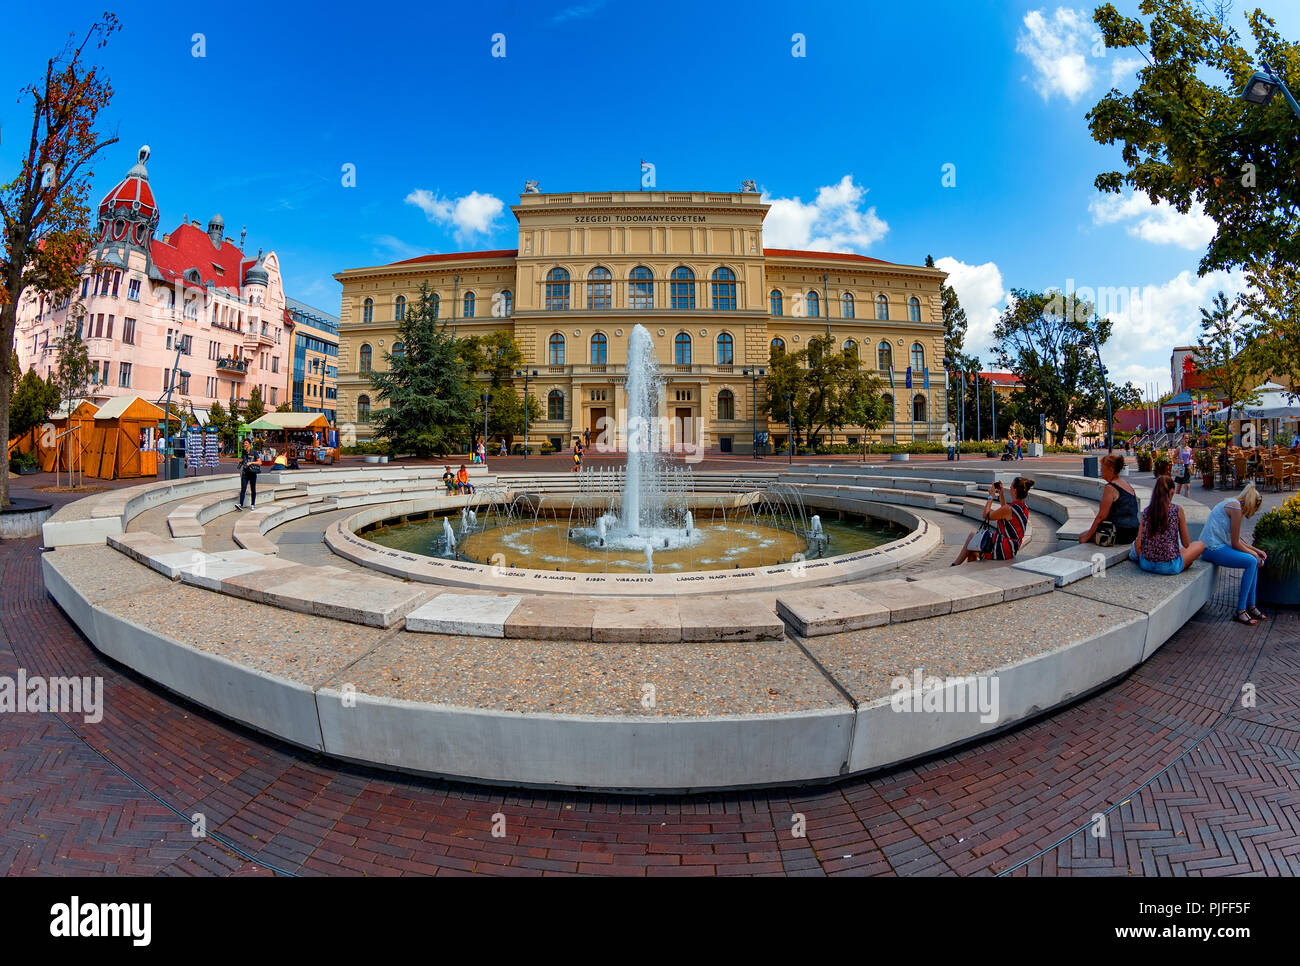 Dugonics square in the center of Szeged with University building on the right,and the Ungar-Mayer secession style palace on the left. Stock Photo